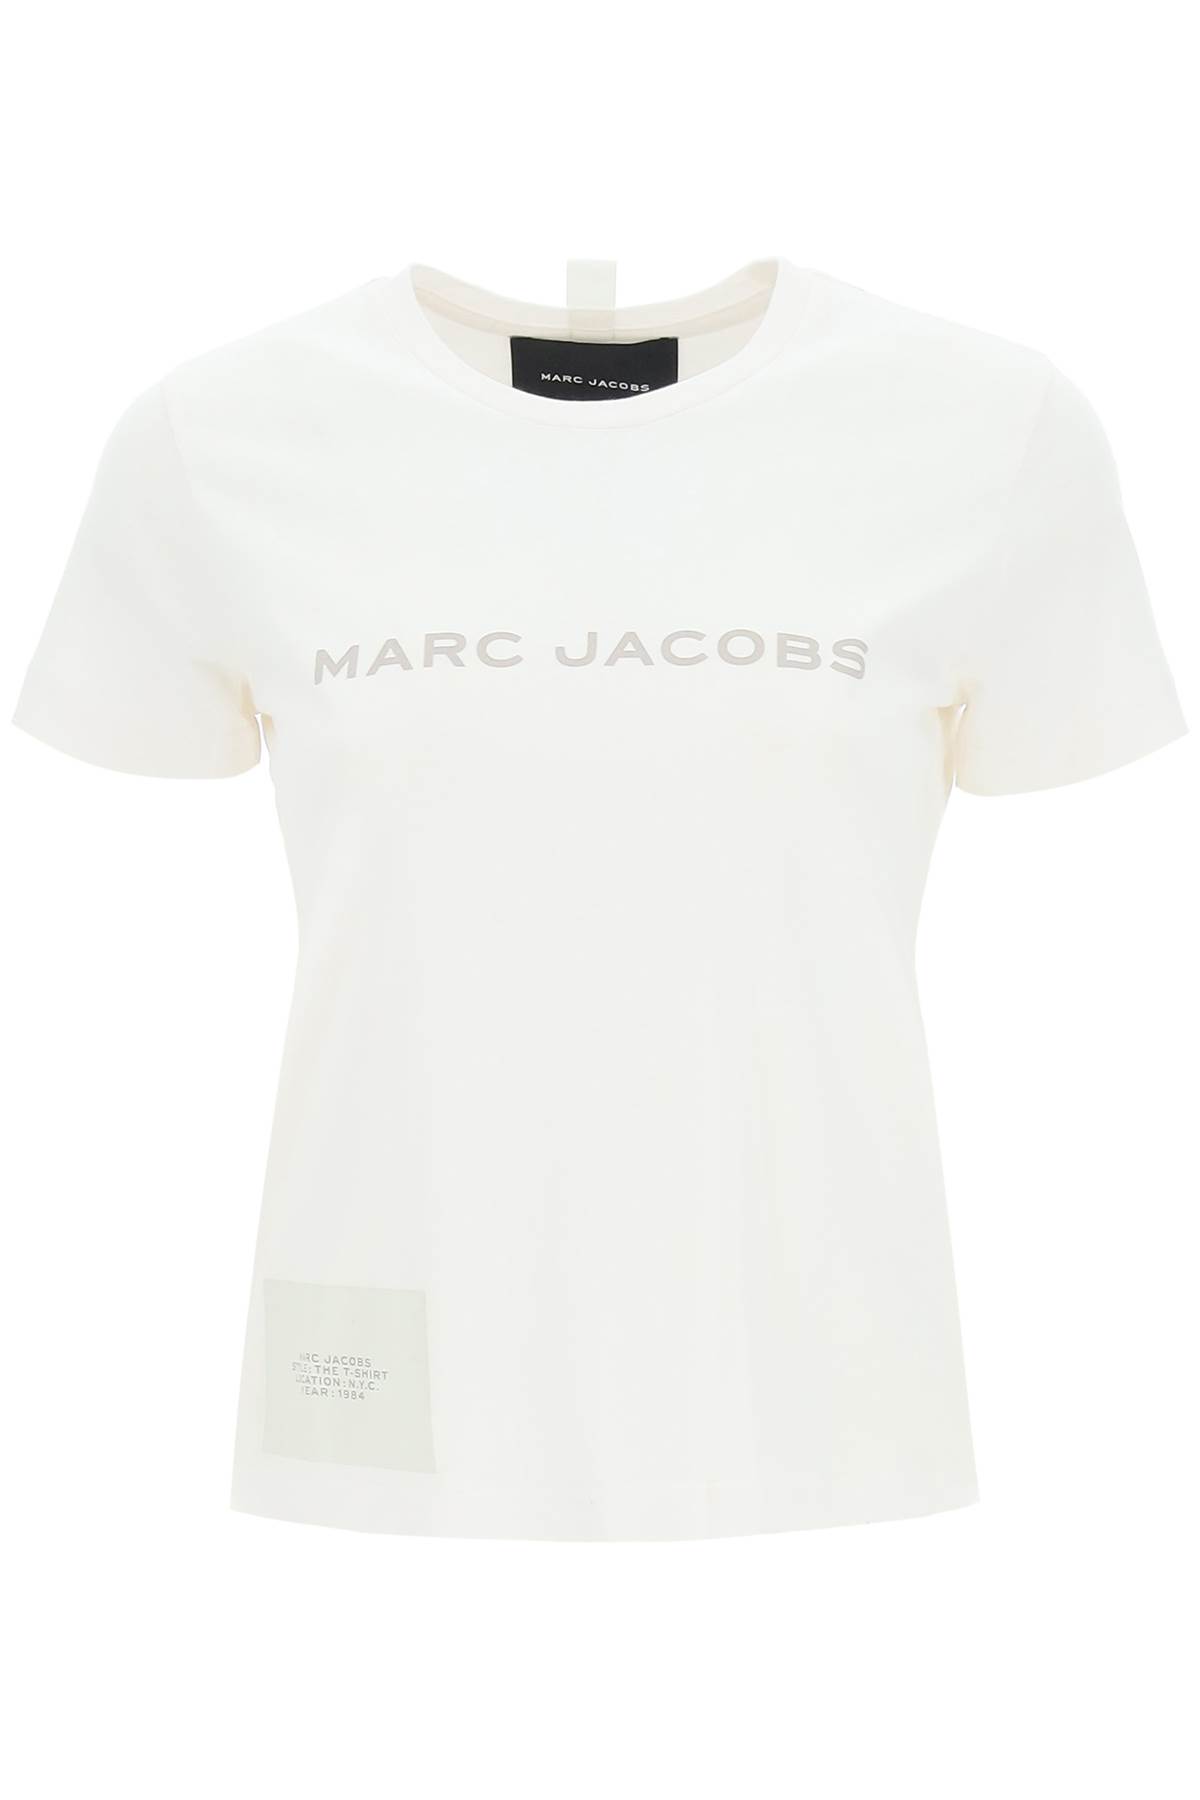 Marc Jacobs The T-shirt - The Color Collection